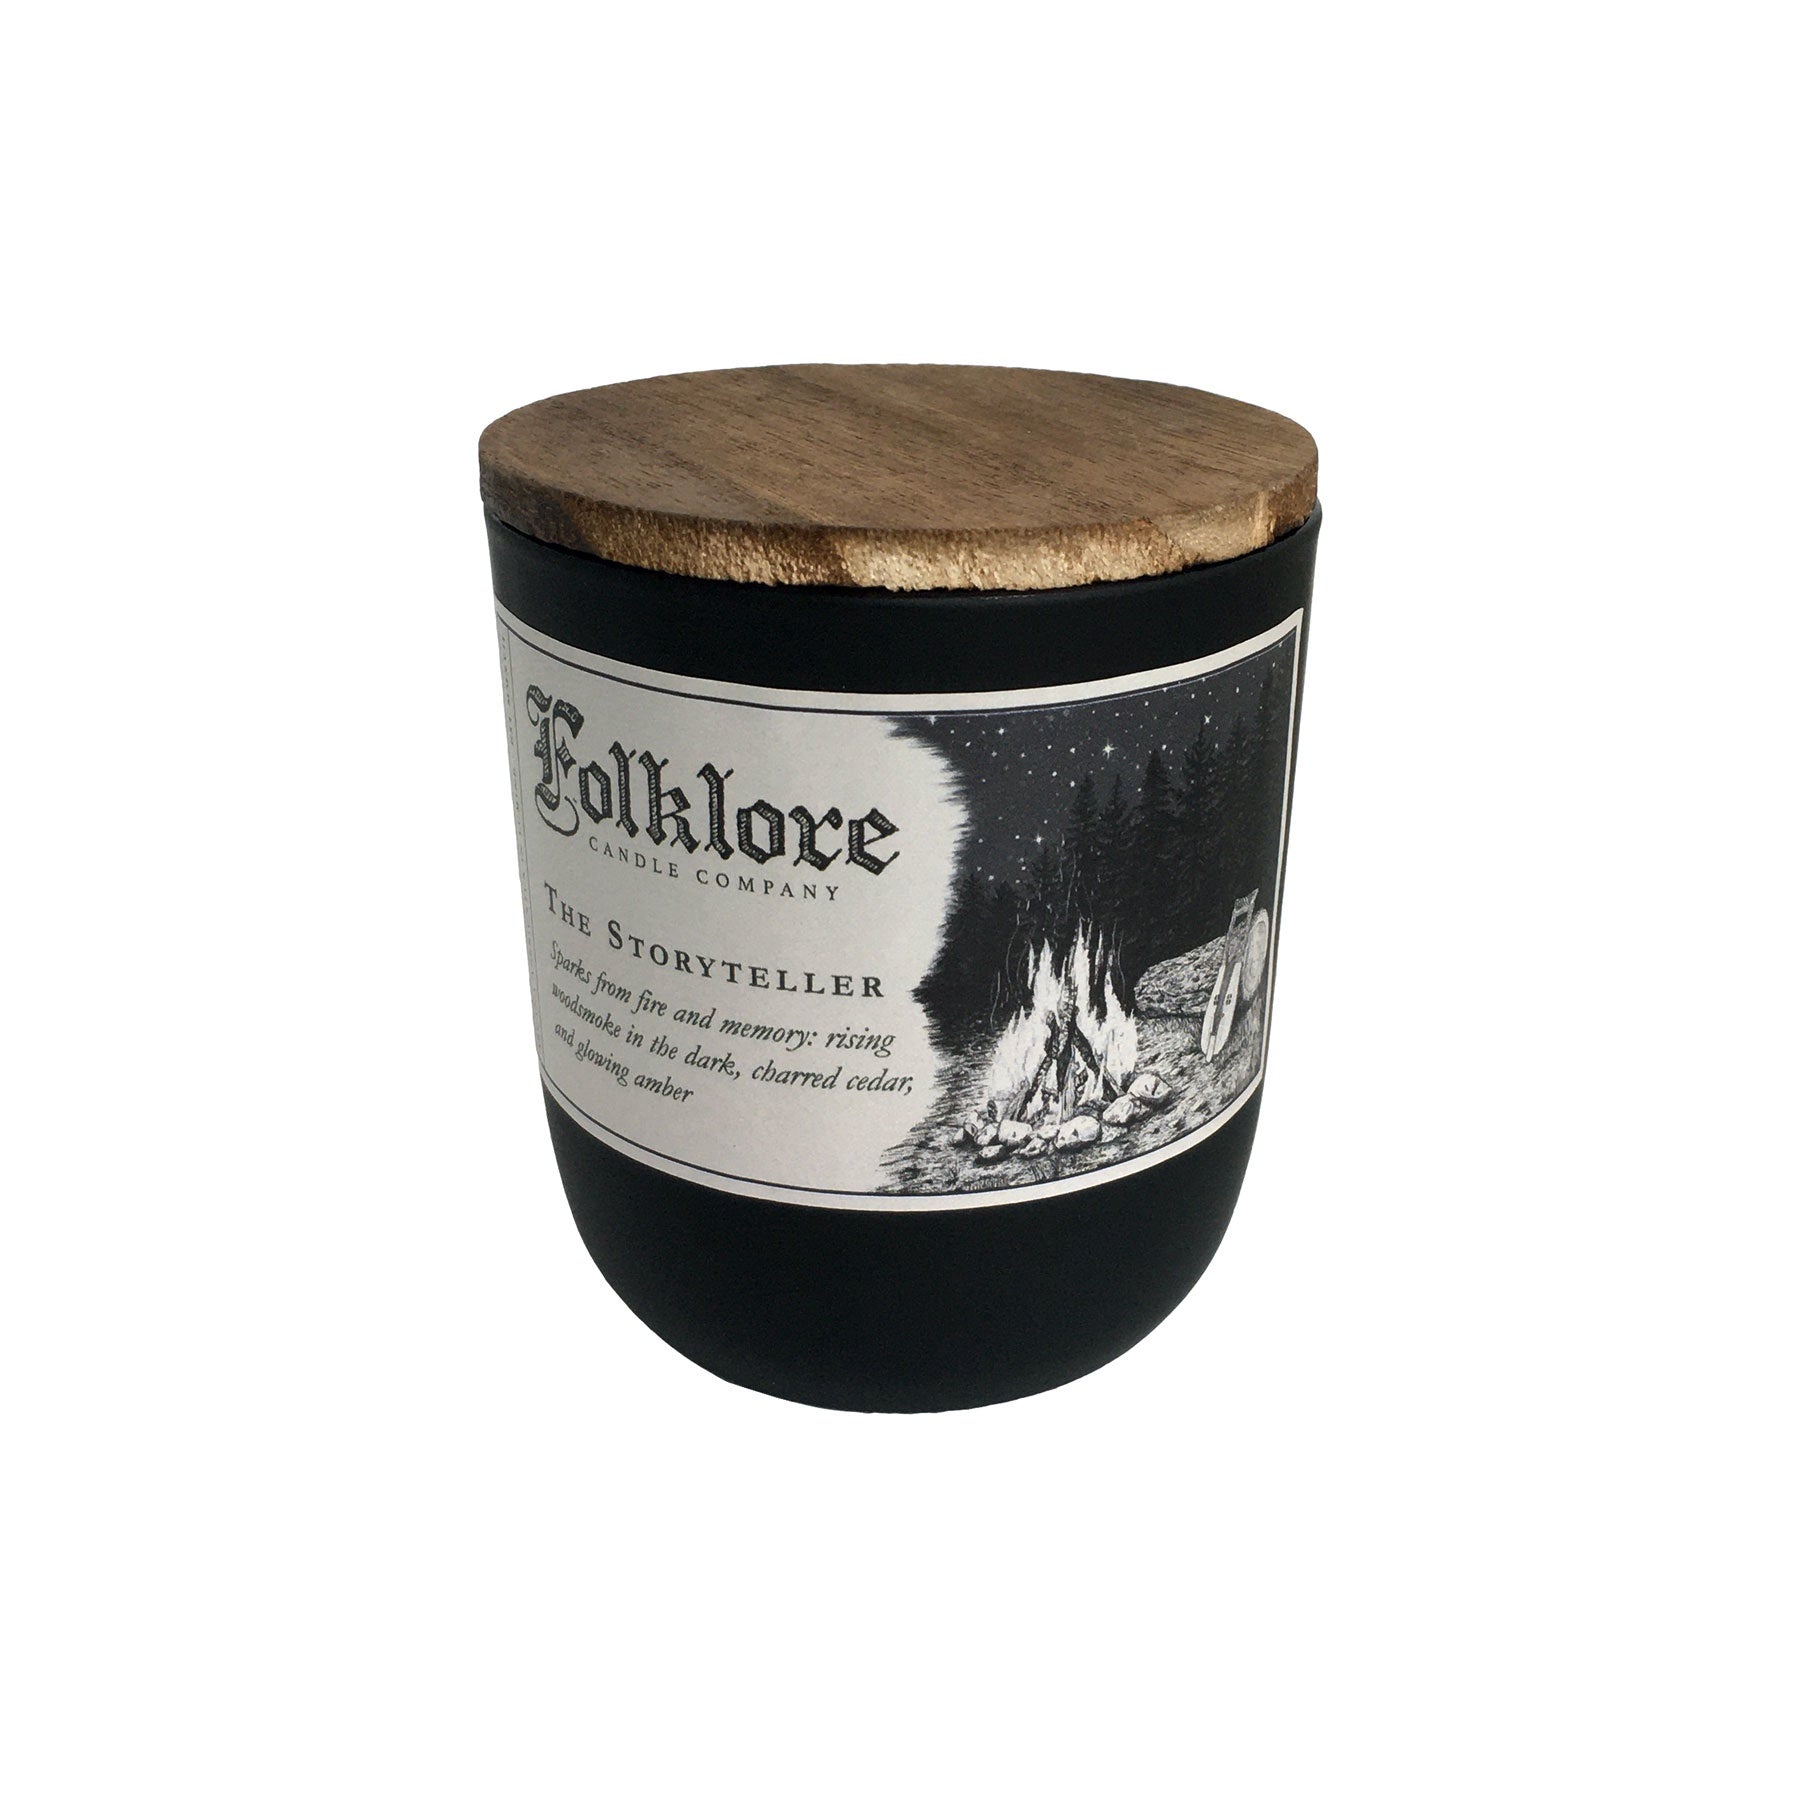 The Storyteller - Folklore Candle Company